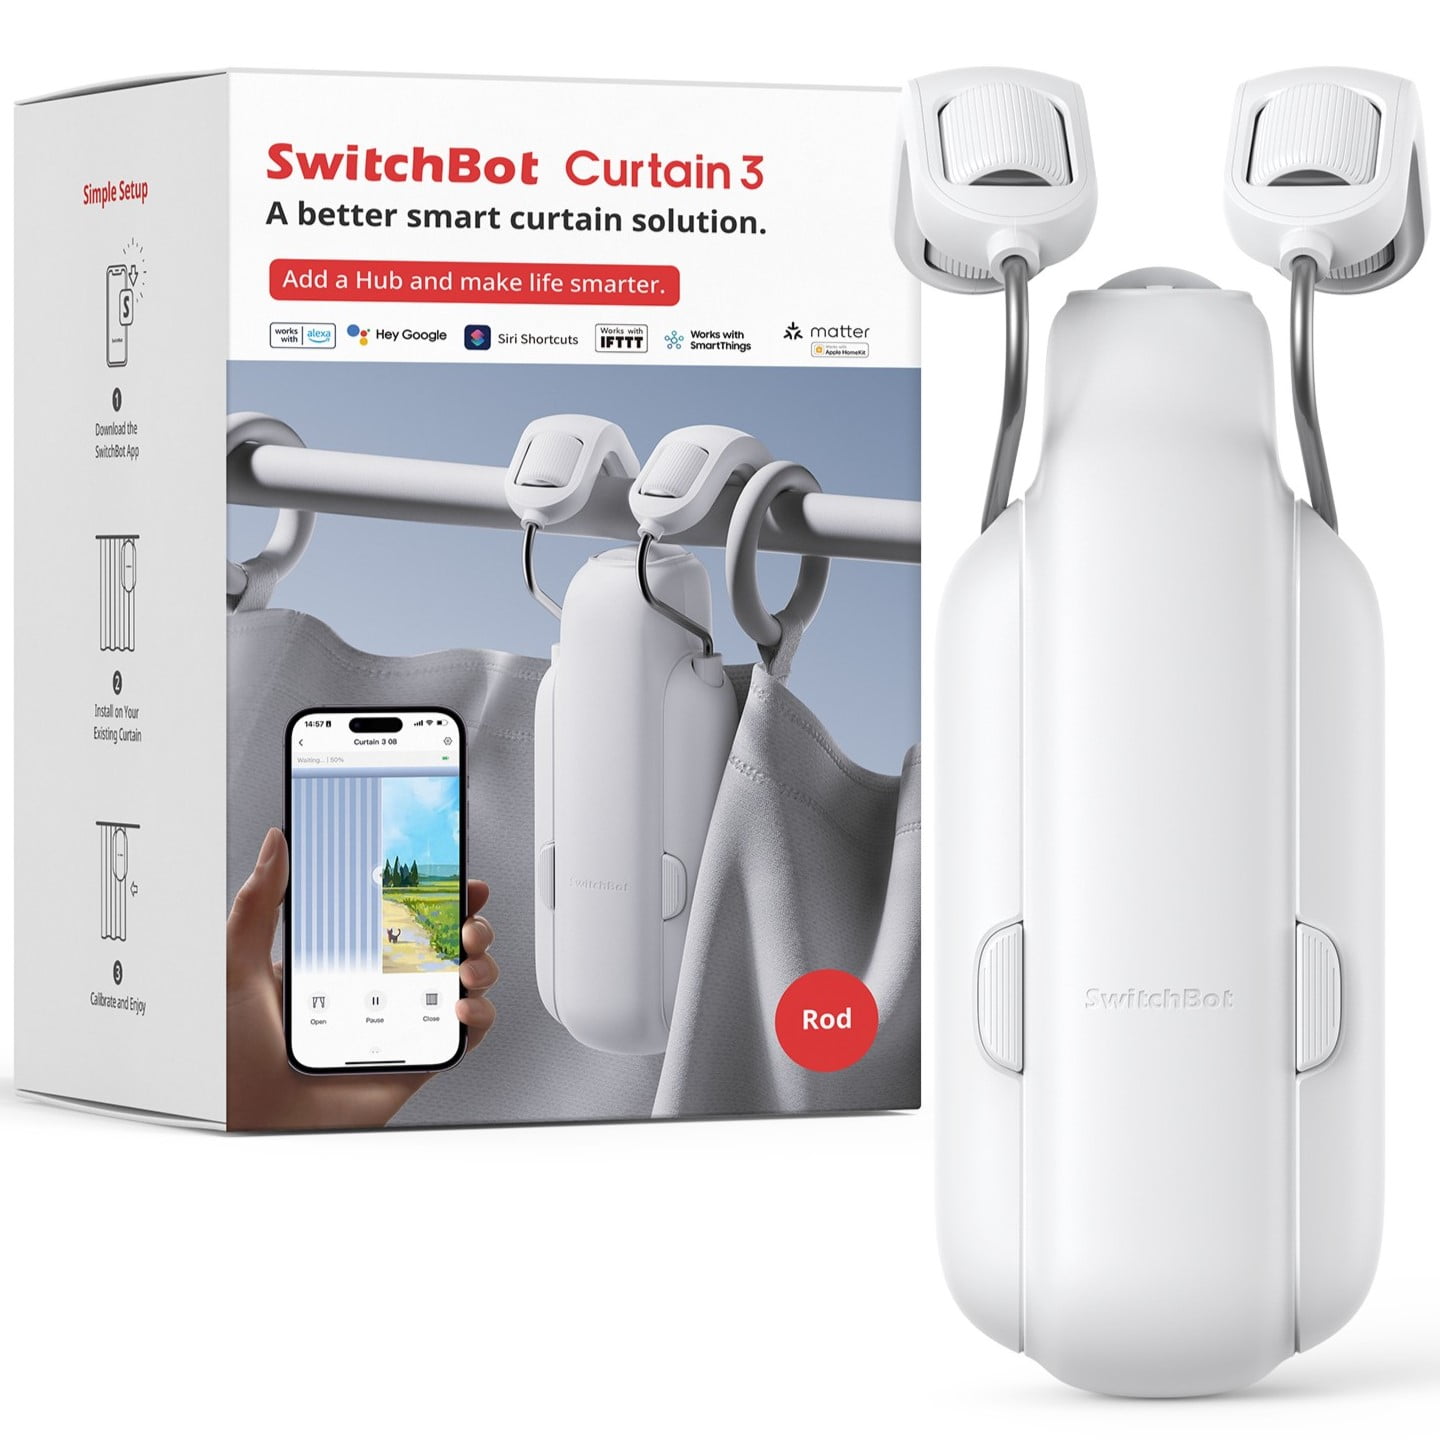 SwitchBot Curtain Rod 2 review: This smart curtain controller gets a  streamlined design